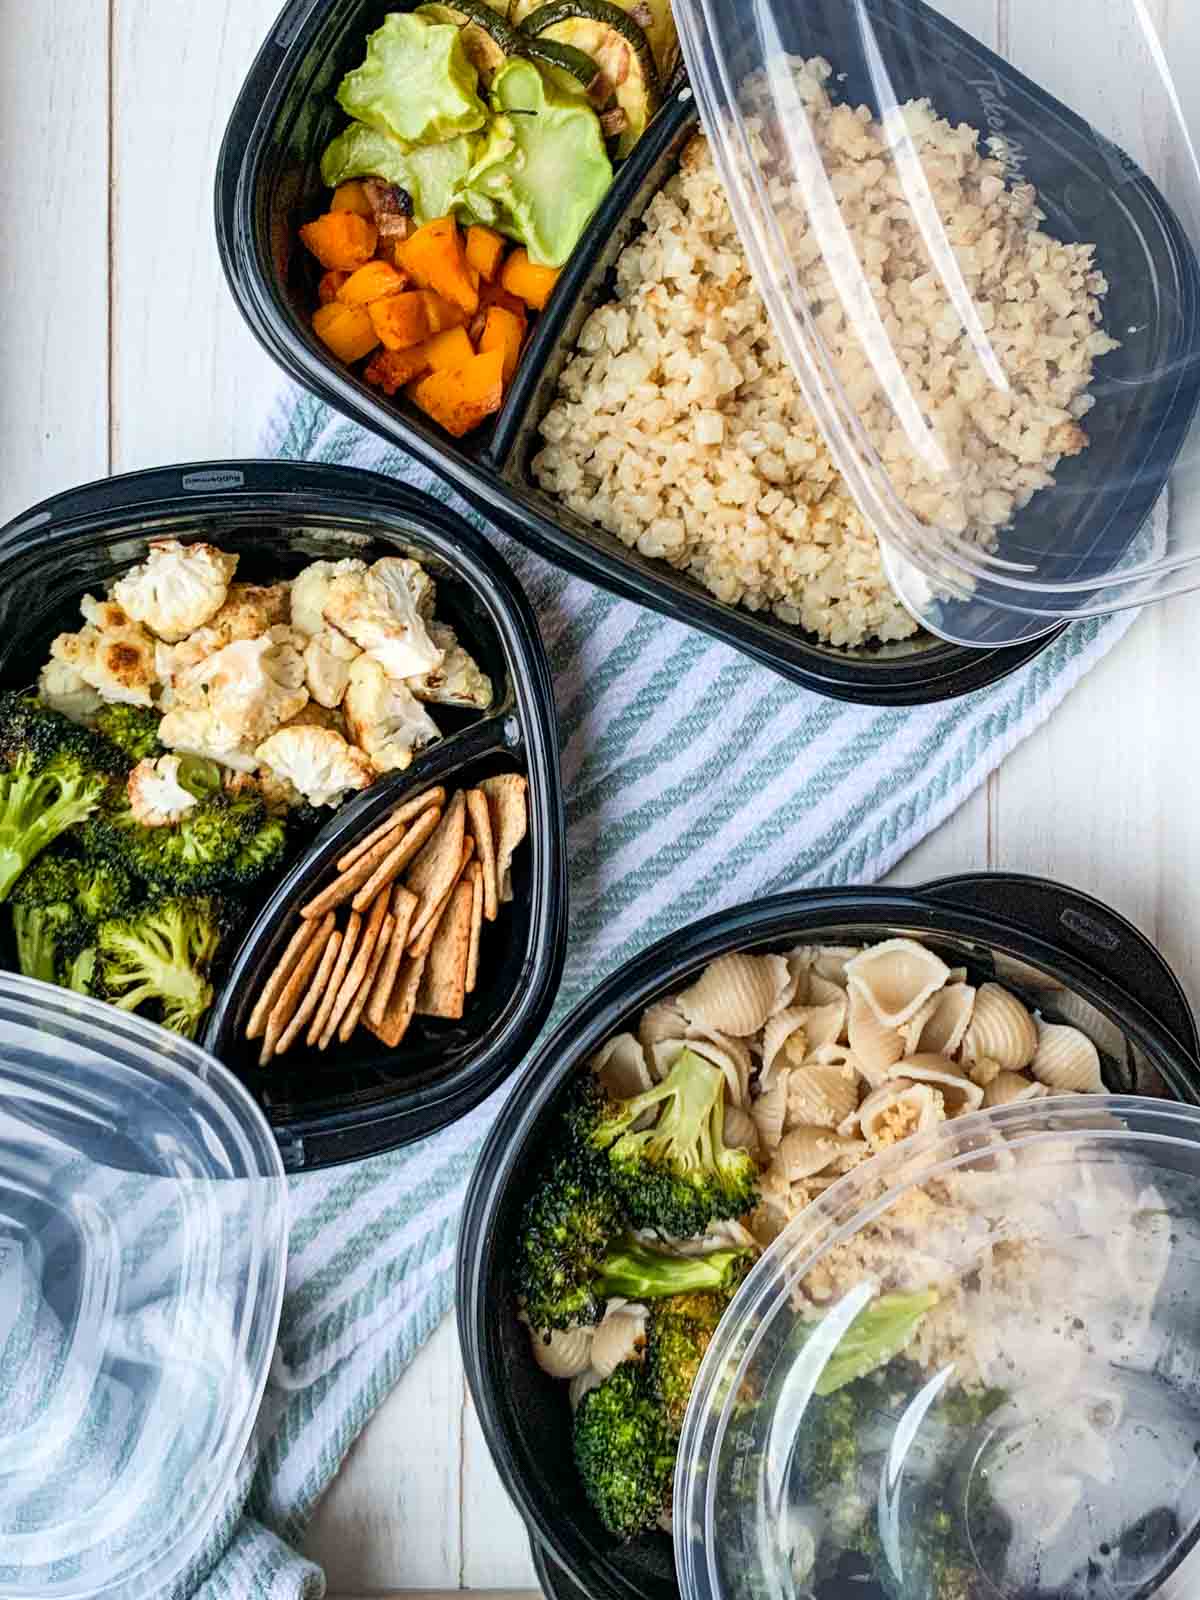 Three black containers with cooked veggies and different grains to make meals in them.